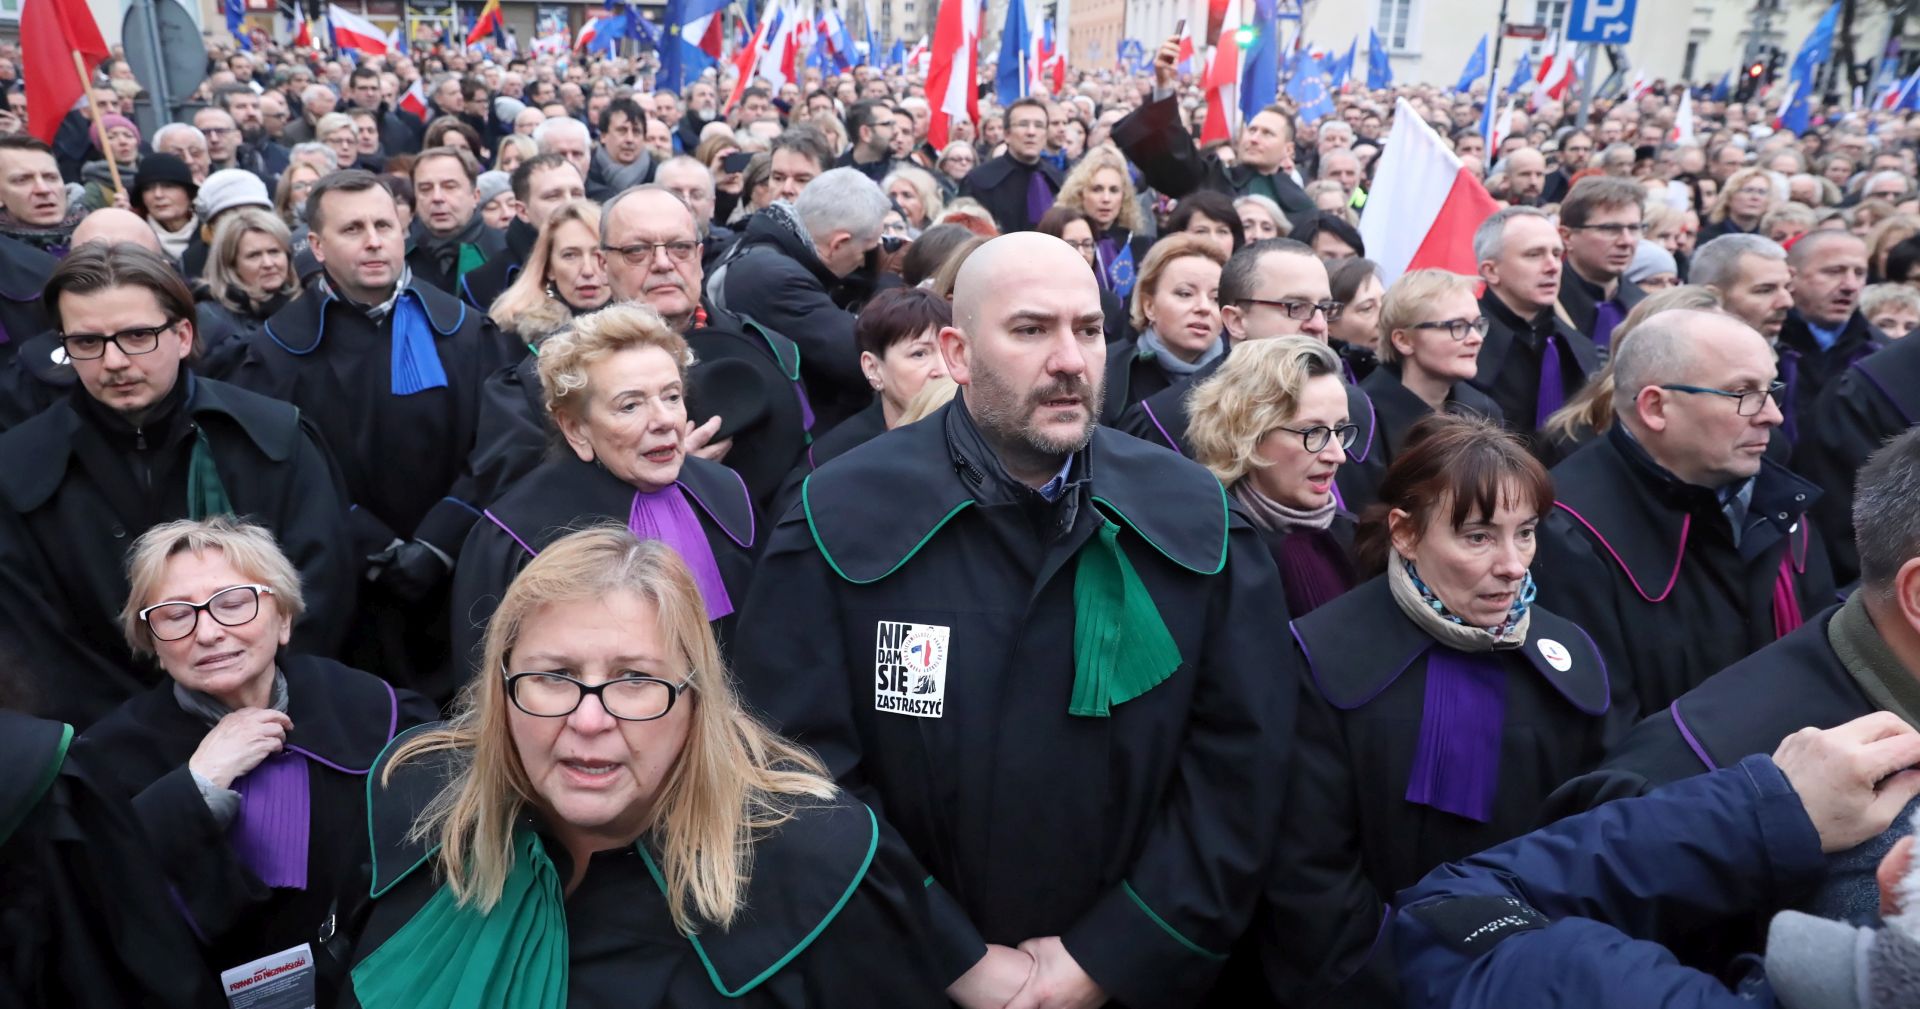 epa08119721 Judges and lawyers from across Europe take part in a demonstration dubbed the 'March of a Thousand Togas' held to protest against amendments to the country's judicial laws, in Warsaw, Poland, 11 January 2020.  EPA/TOMASZ GZELL POLAND OUT